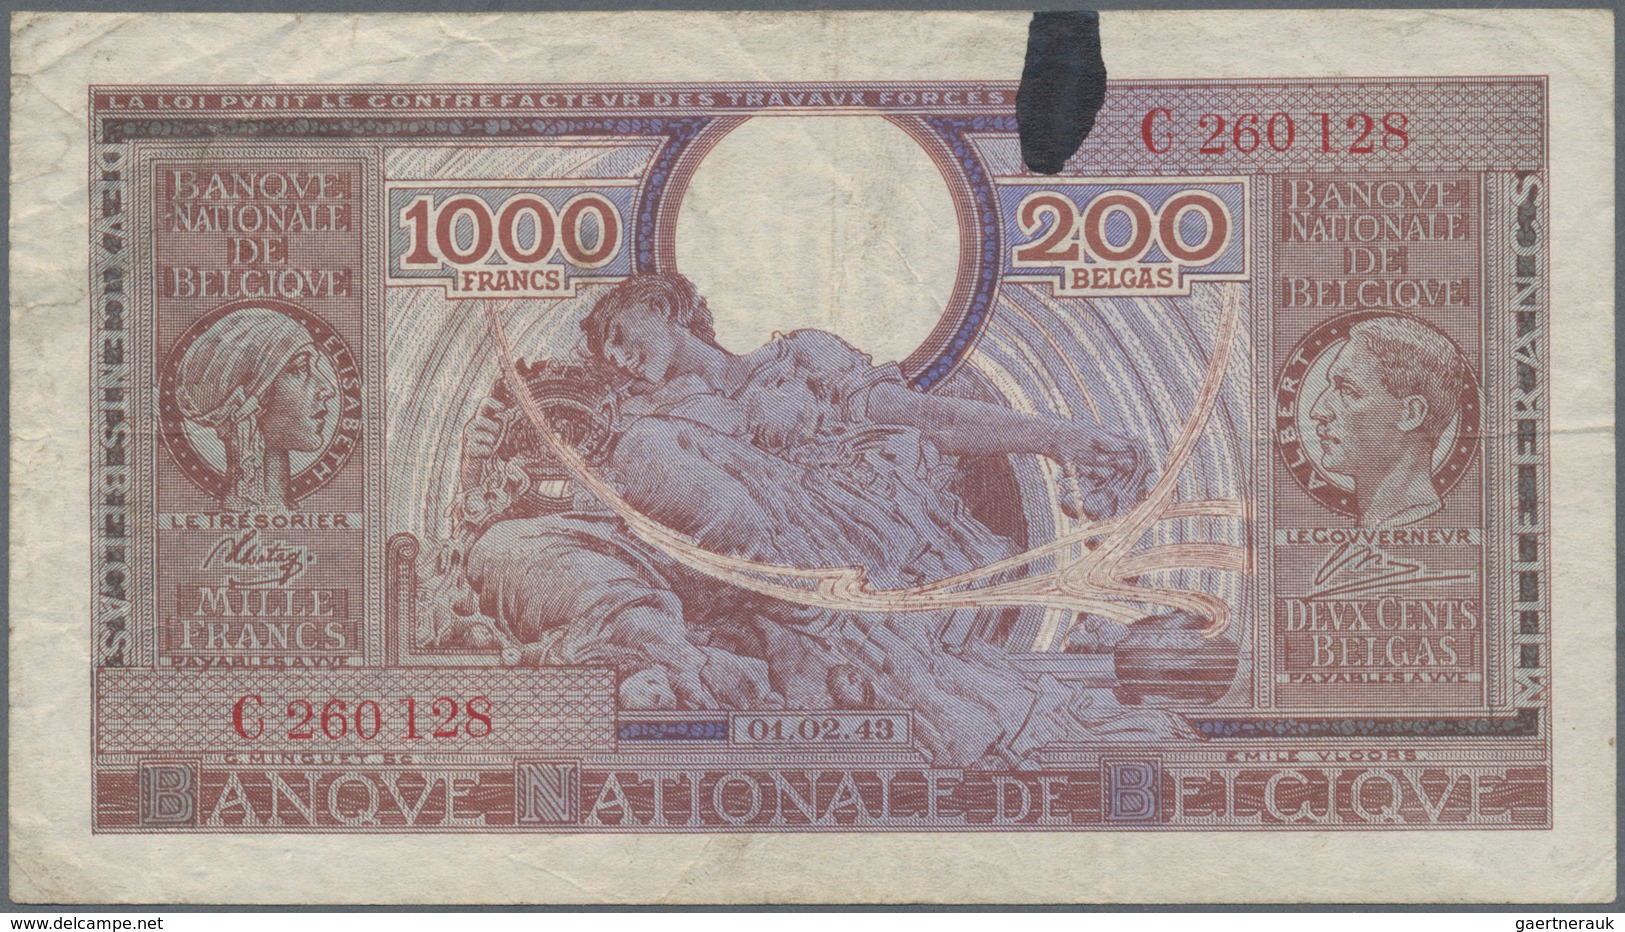 01128 Belgium / Belgien: 1000 Francs = 200 Belgas 1943 P. 125, Used With Folds And Creases, An Ink Stain A - [ 1] …-1830 : Antes De La Independencia